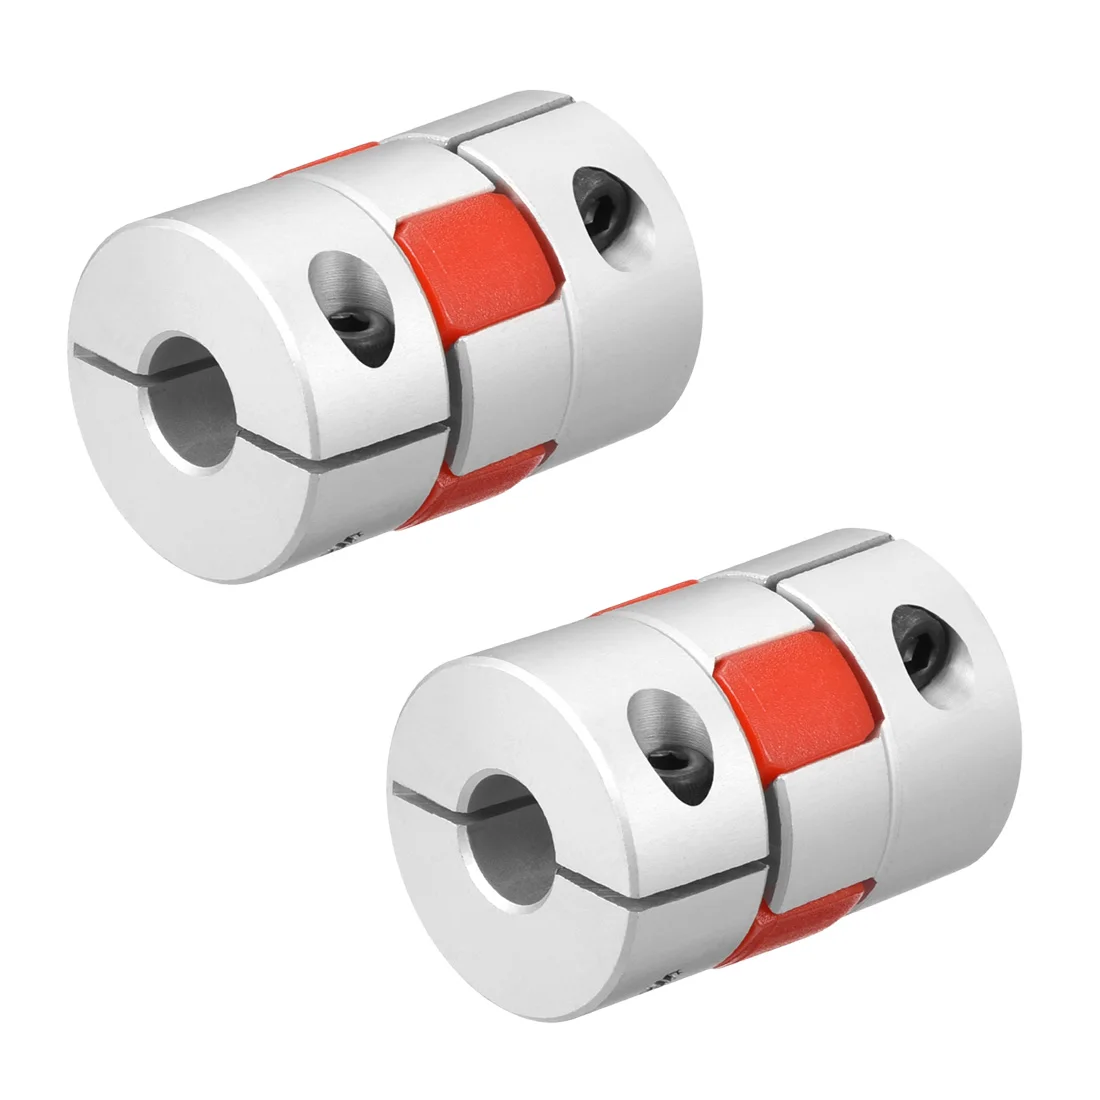 

uxcell 2pcs Shaft Coupling 8mm to 8mm Bore L35xD25 Flexible Coupler Joint for Servo Stepped Motor